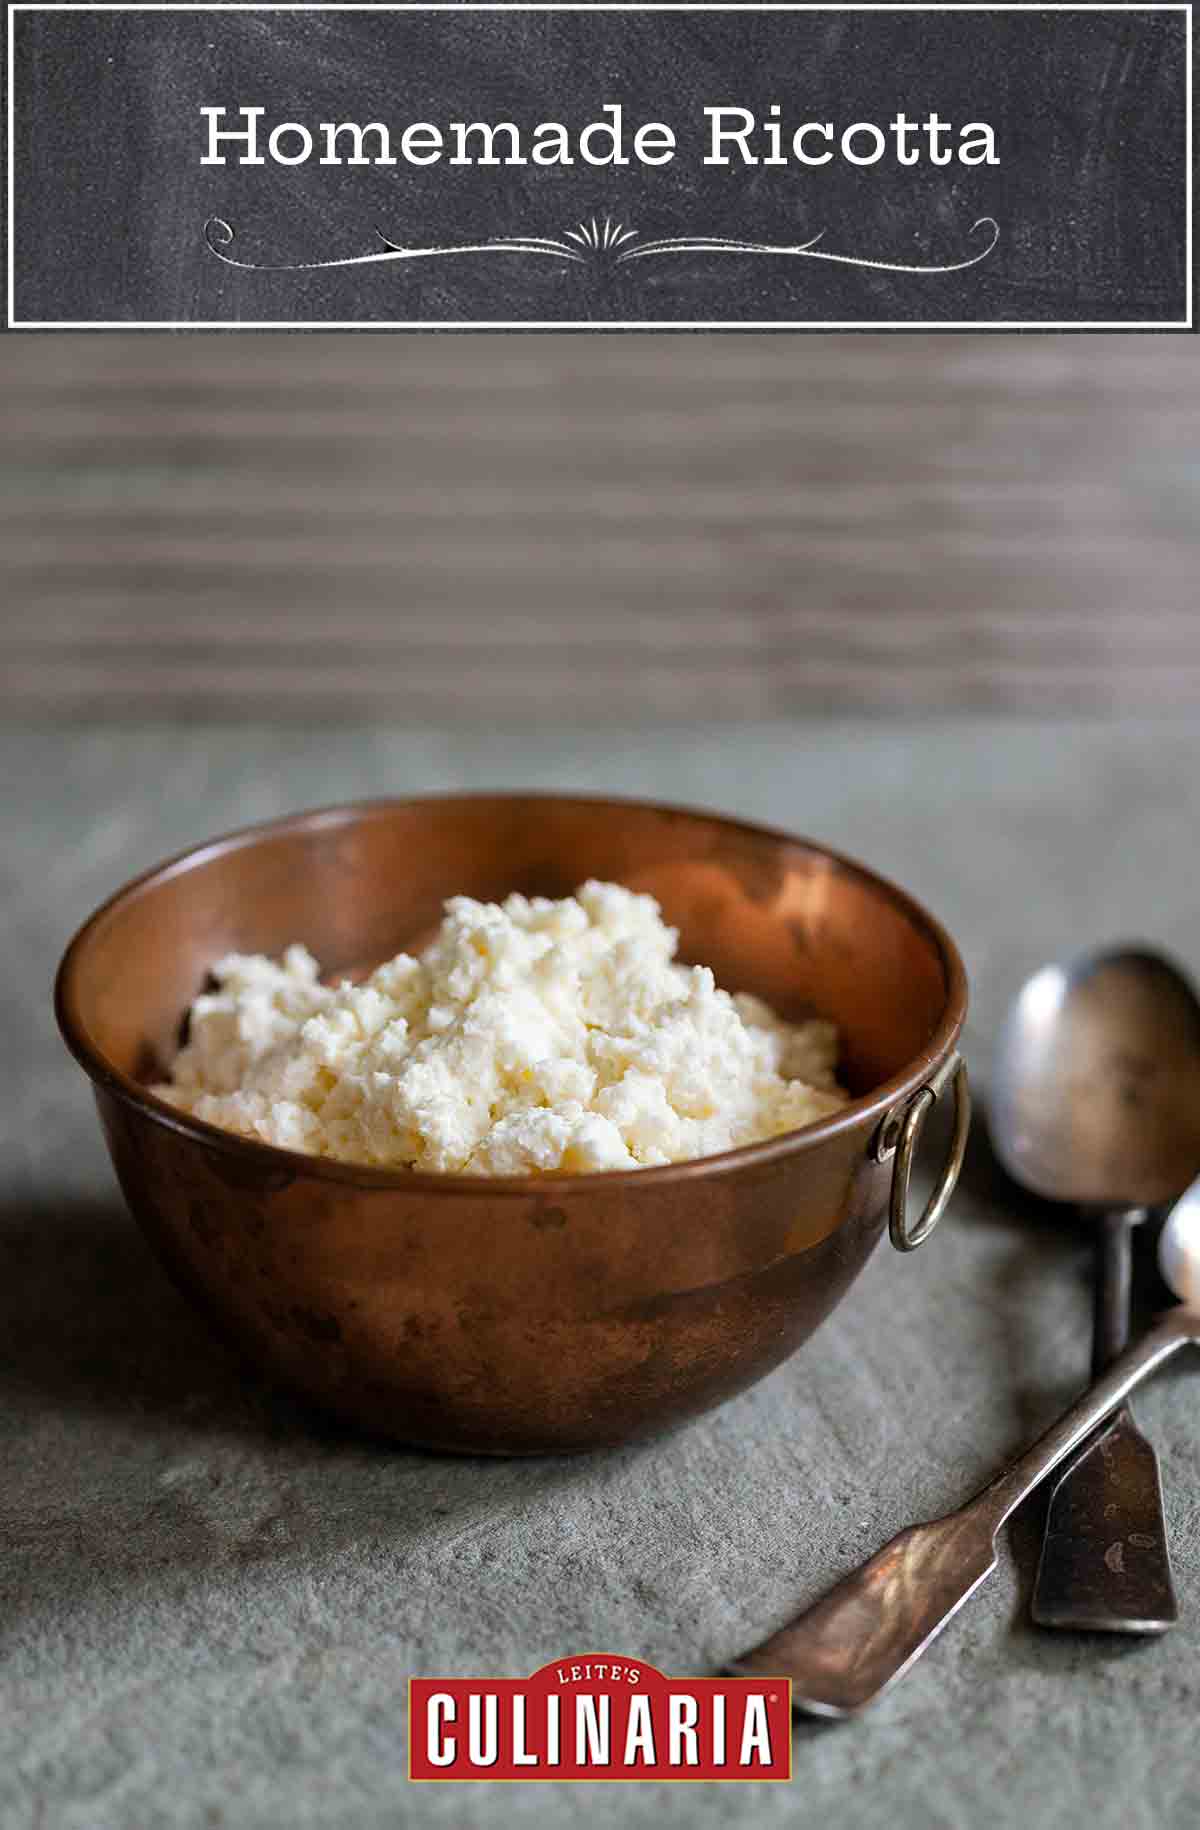 A bowl filled with fresh whole milk ricotta and a spoon on the side.